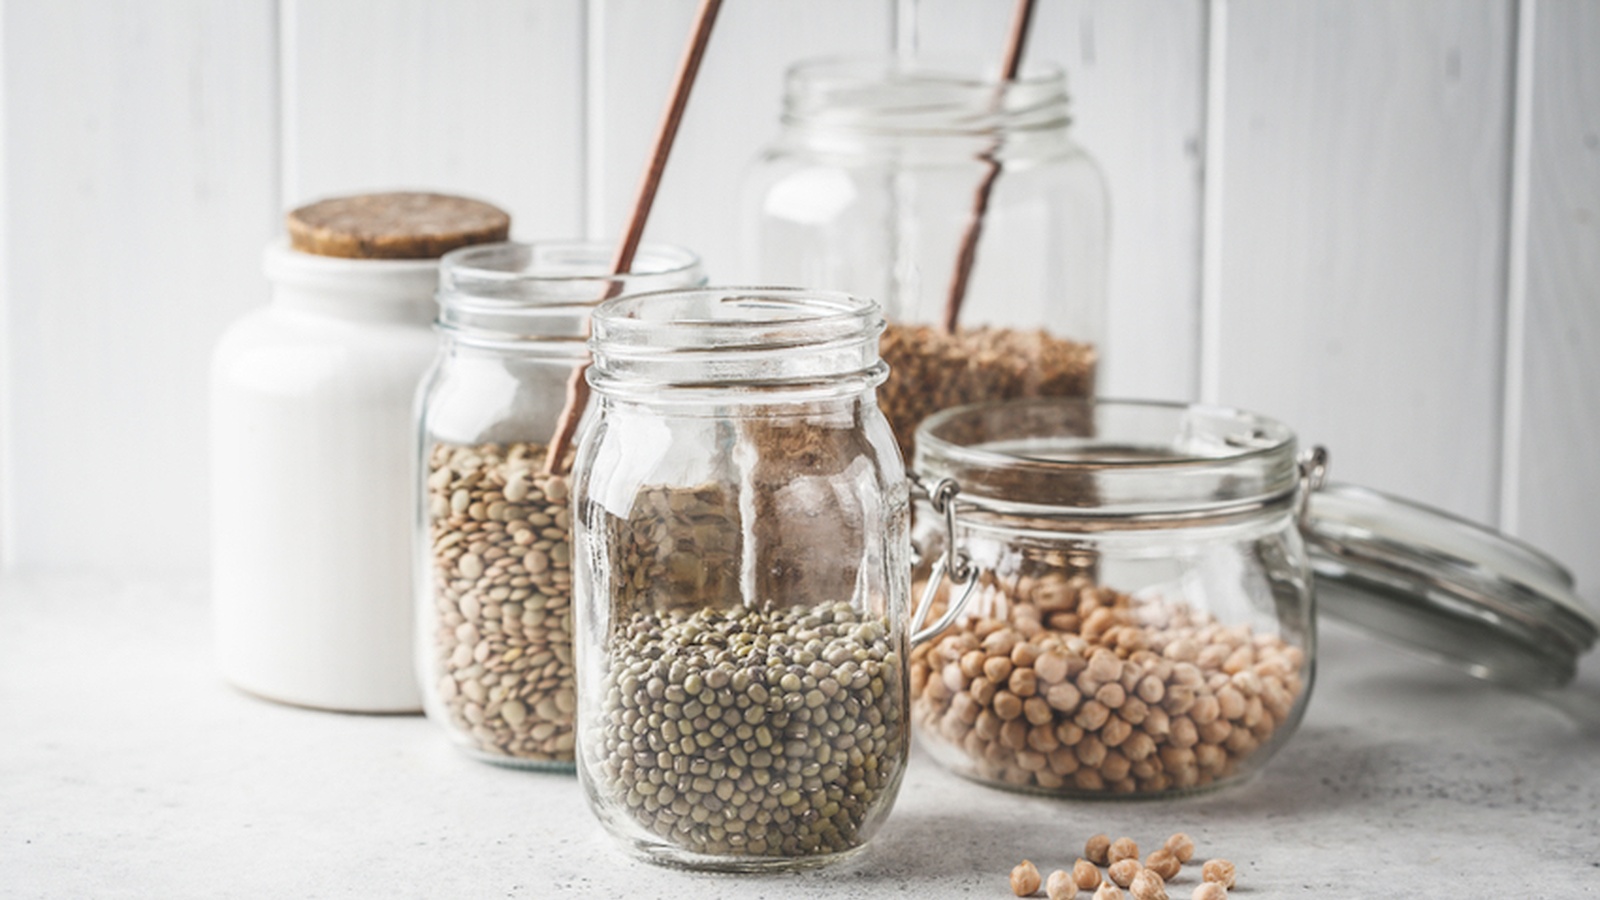 10 Ingredients Every Plant-Based Pantry Needs | FOOD MATTERS®